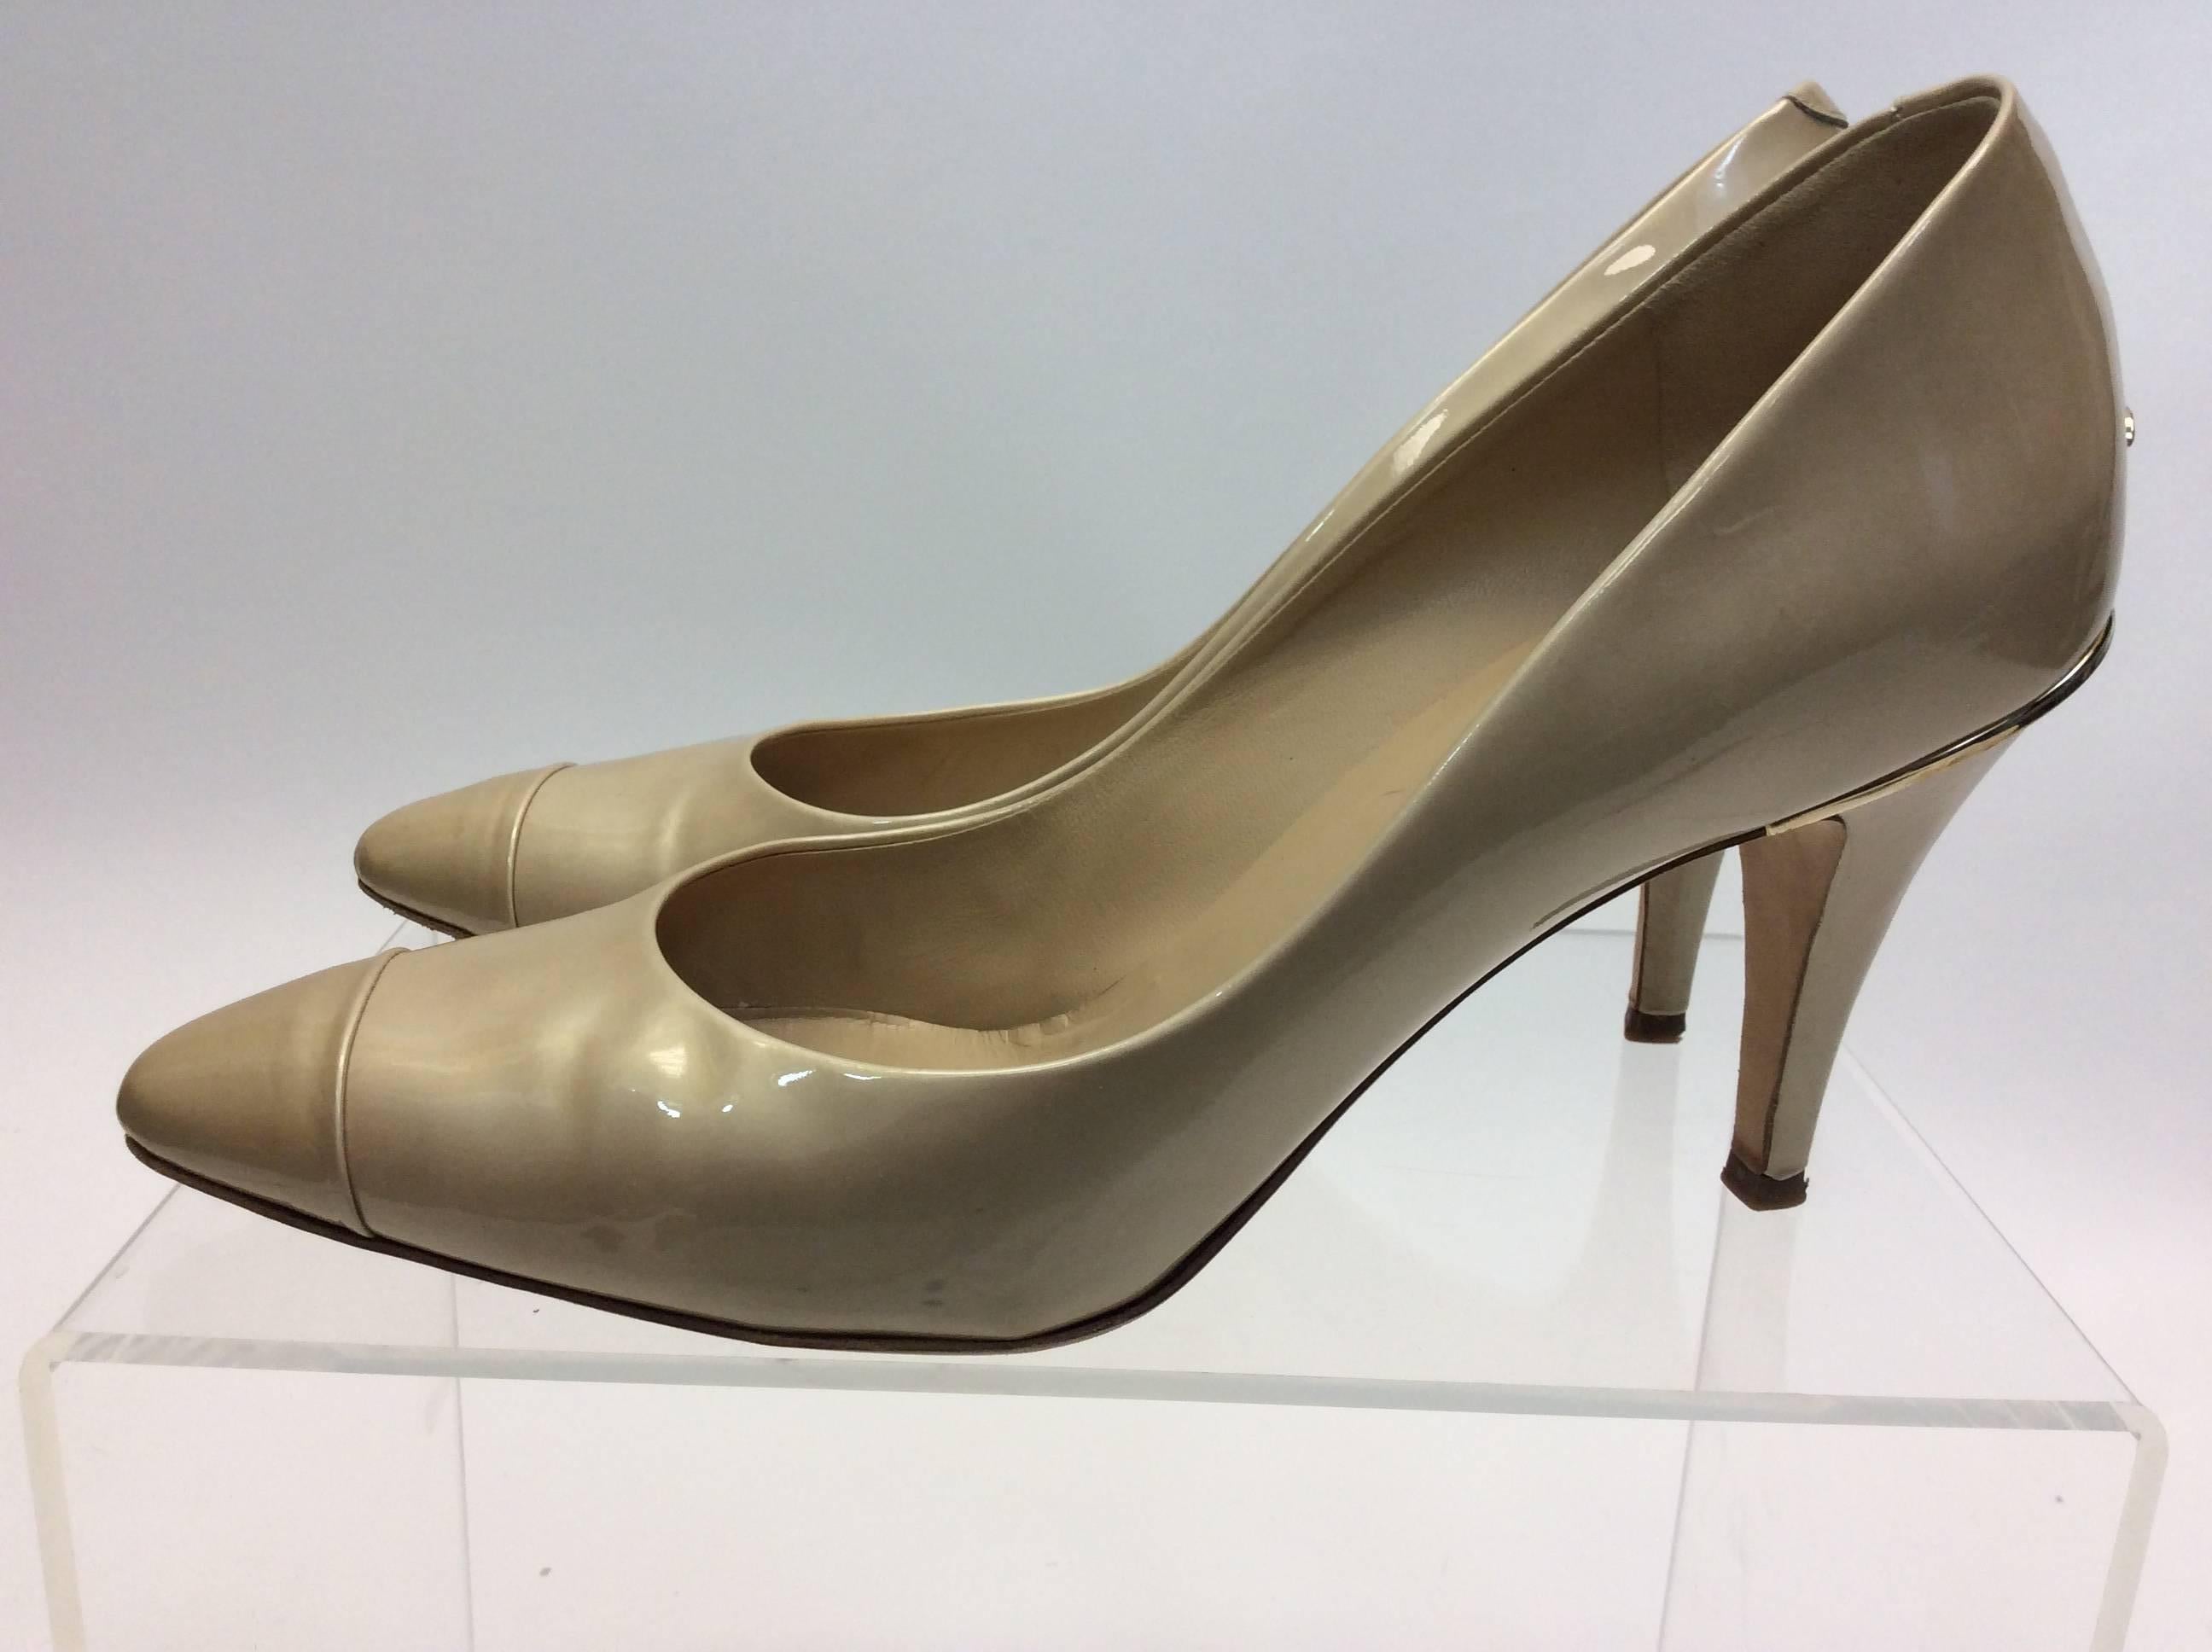 Chanel Nude Patent Leather Pumps
39.5
Made in Italy
$450
3